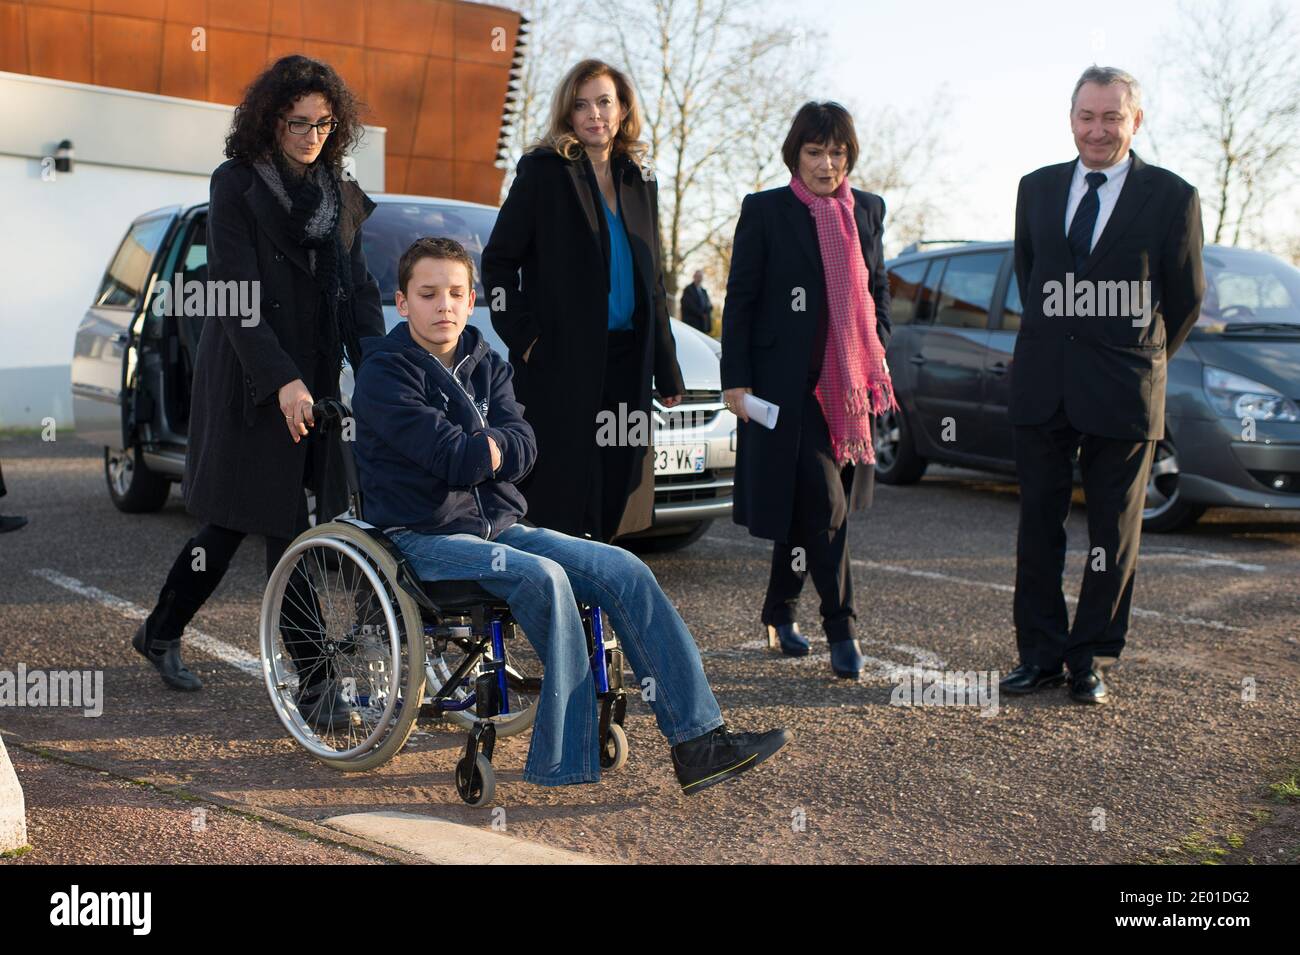 Valerie Trierweiler and Marie Arlette Carlotti meet four members amputed Theo Curin, his mother Stephanie, Philippe Croizon and Gerard Masson, at the C.R.E.P.S in Vichy, France, on November 27, 2013. Photo by Christophe Guibbaud/ABACAPRESS.COM Stock Photo